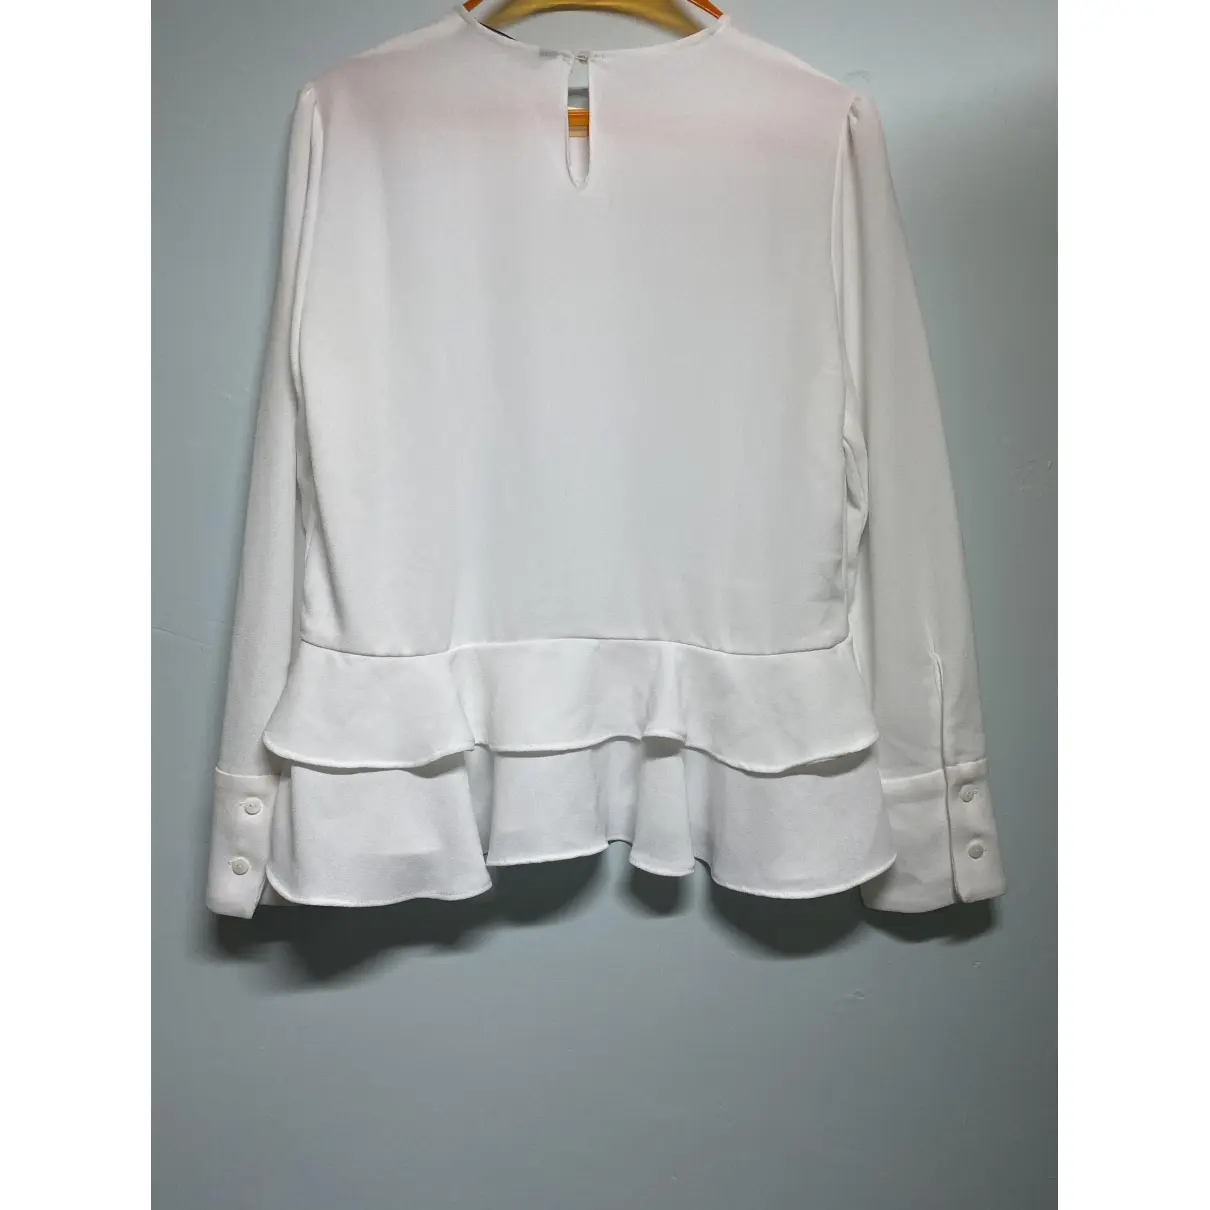 Zara White Polyester Top for sale